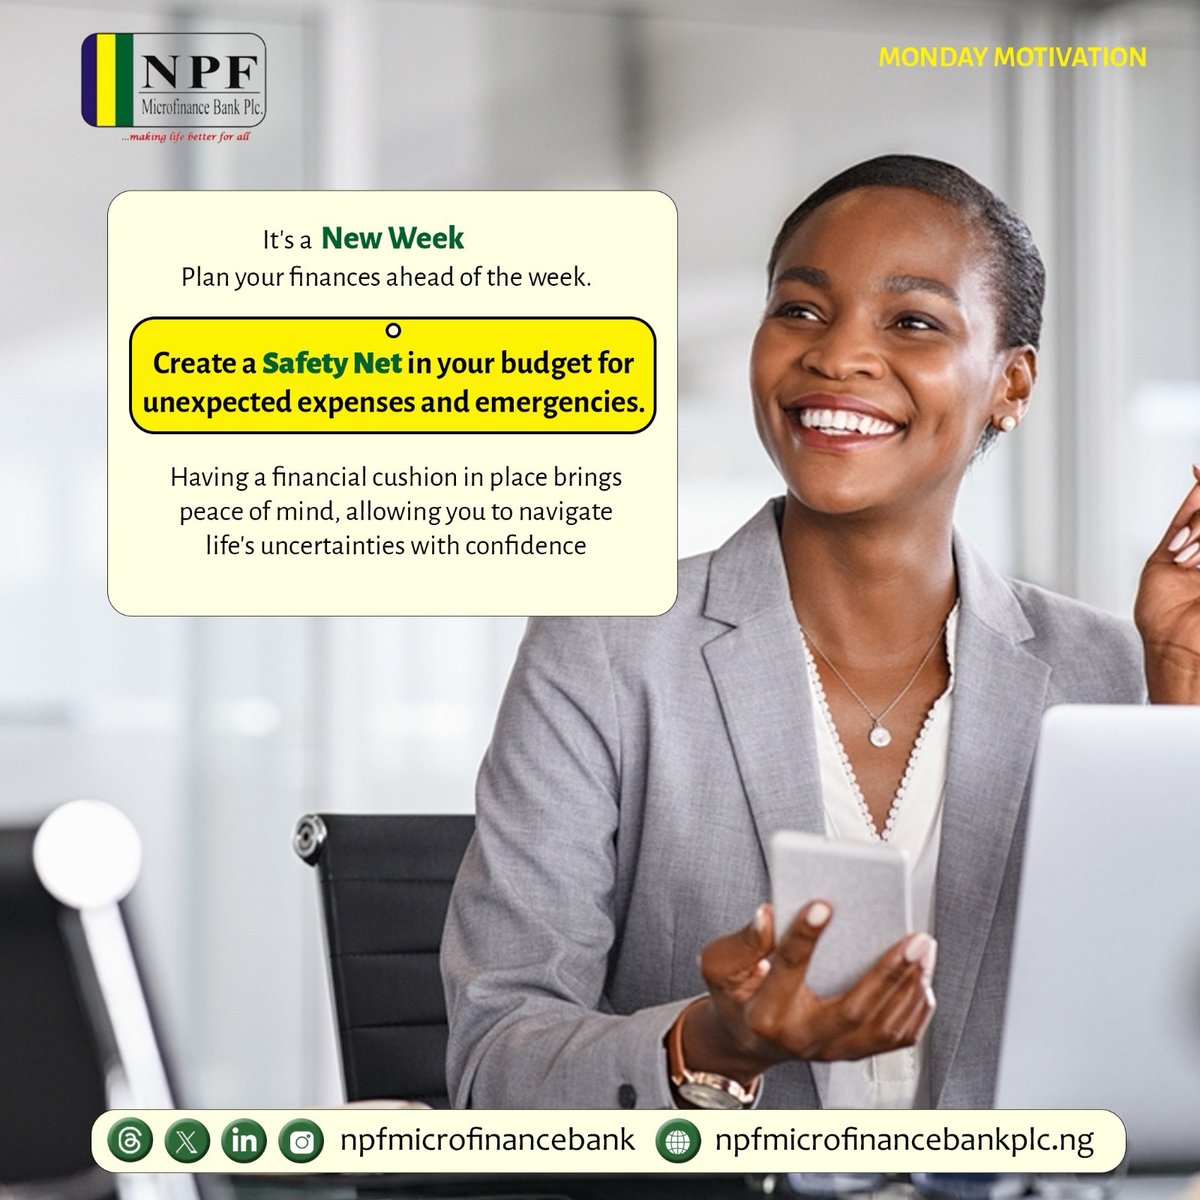 Embrace the new week with a proactive mindset! Take time to plan your finances ahead, creating a safety net for any unexpected twists life may throw your way. Have a great week! 
#FinancialPlanning #PeaceOfMind #NewWeekNewGoals